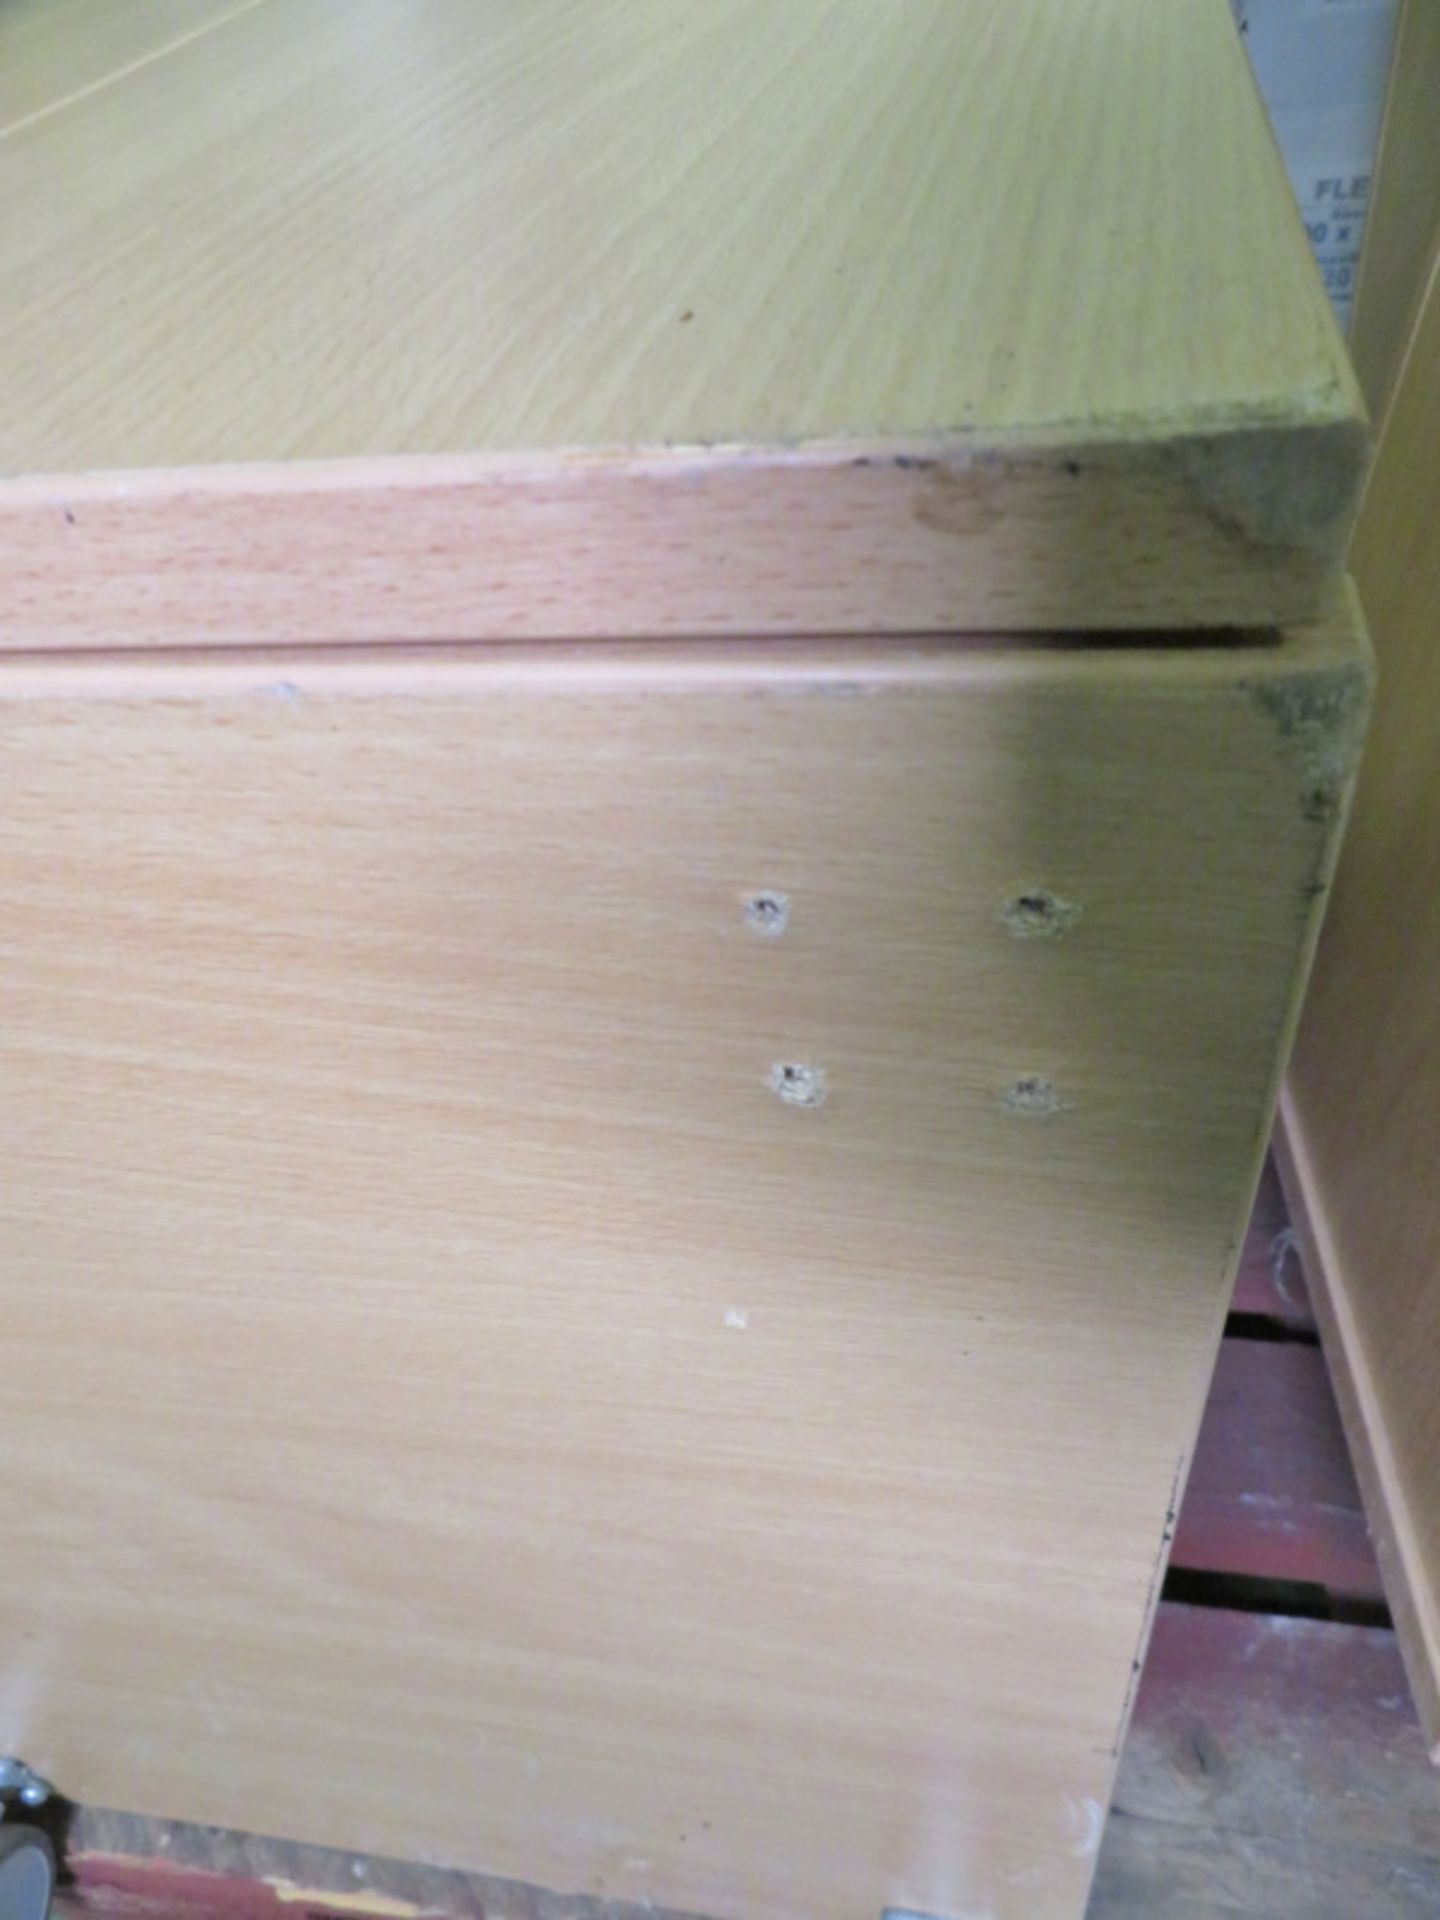 3x Bed Side Cabinets - W 450mm x D 550mm x H 980mm - missing castors - Image 3 of 5